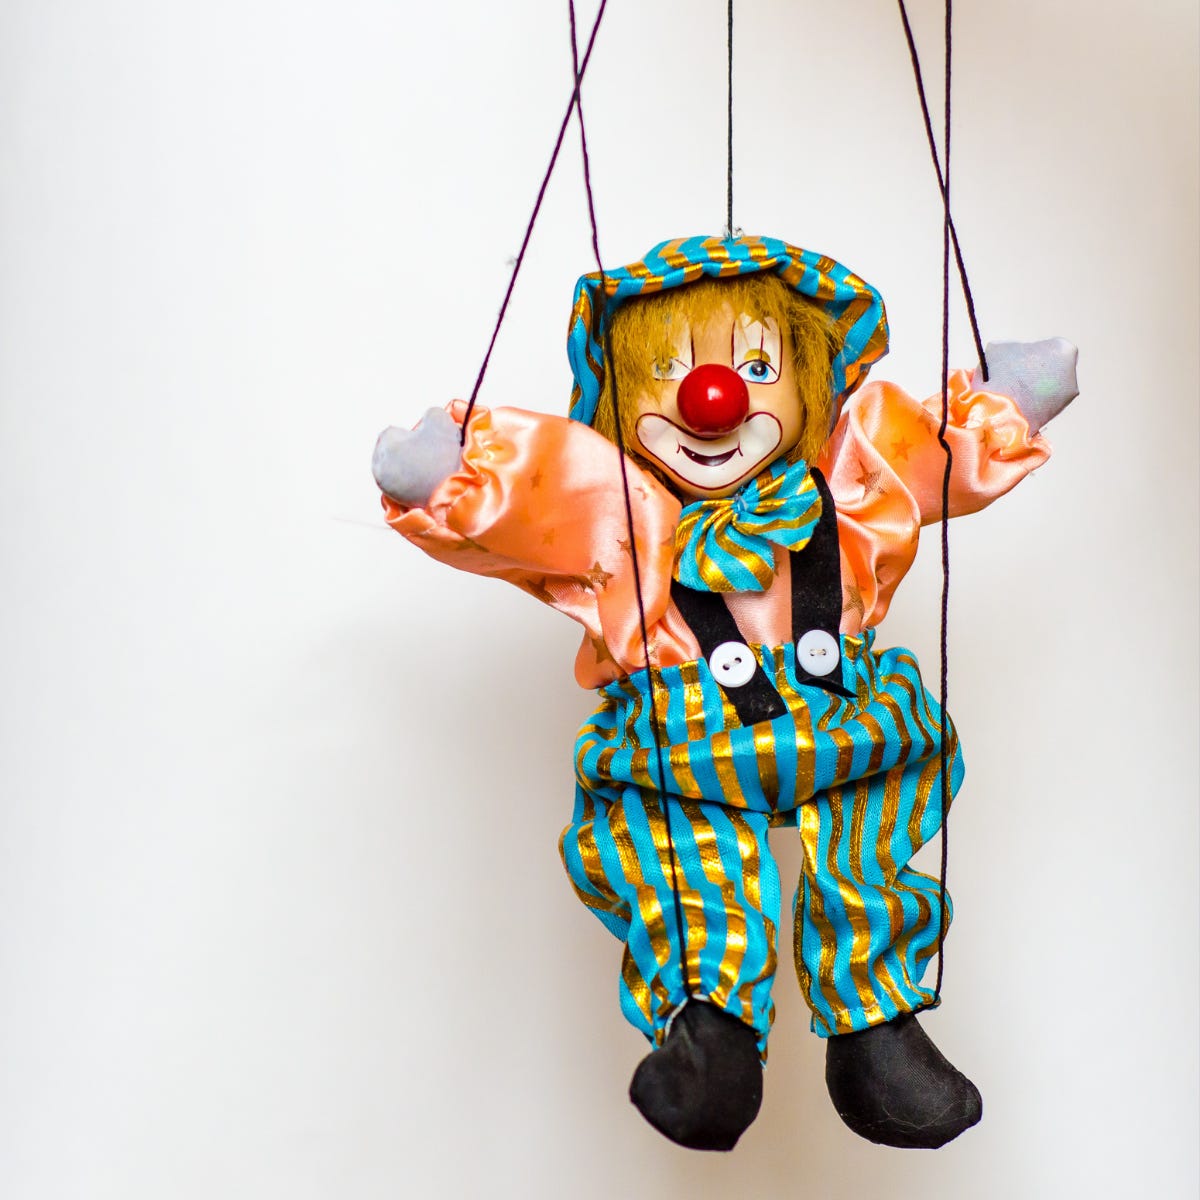 Are you a Puppet Owner?